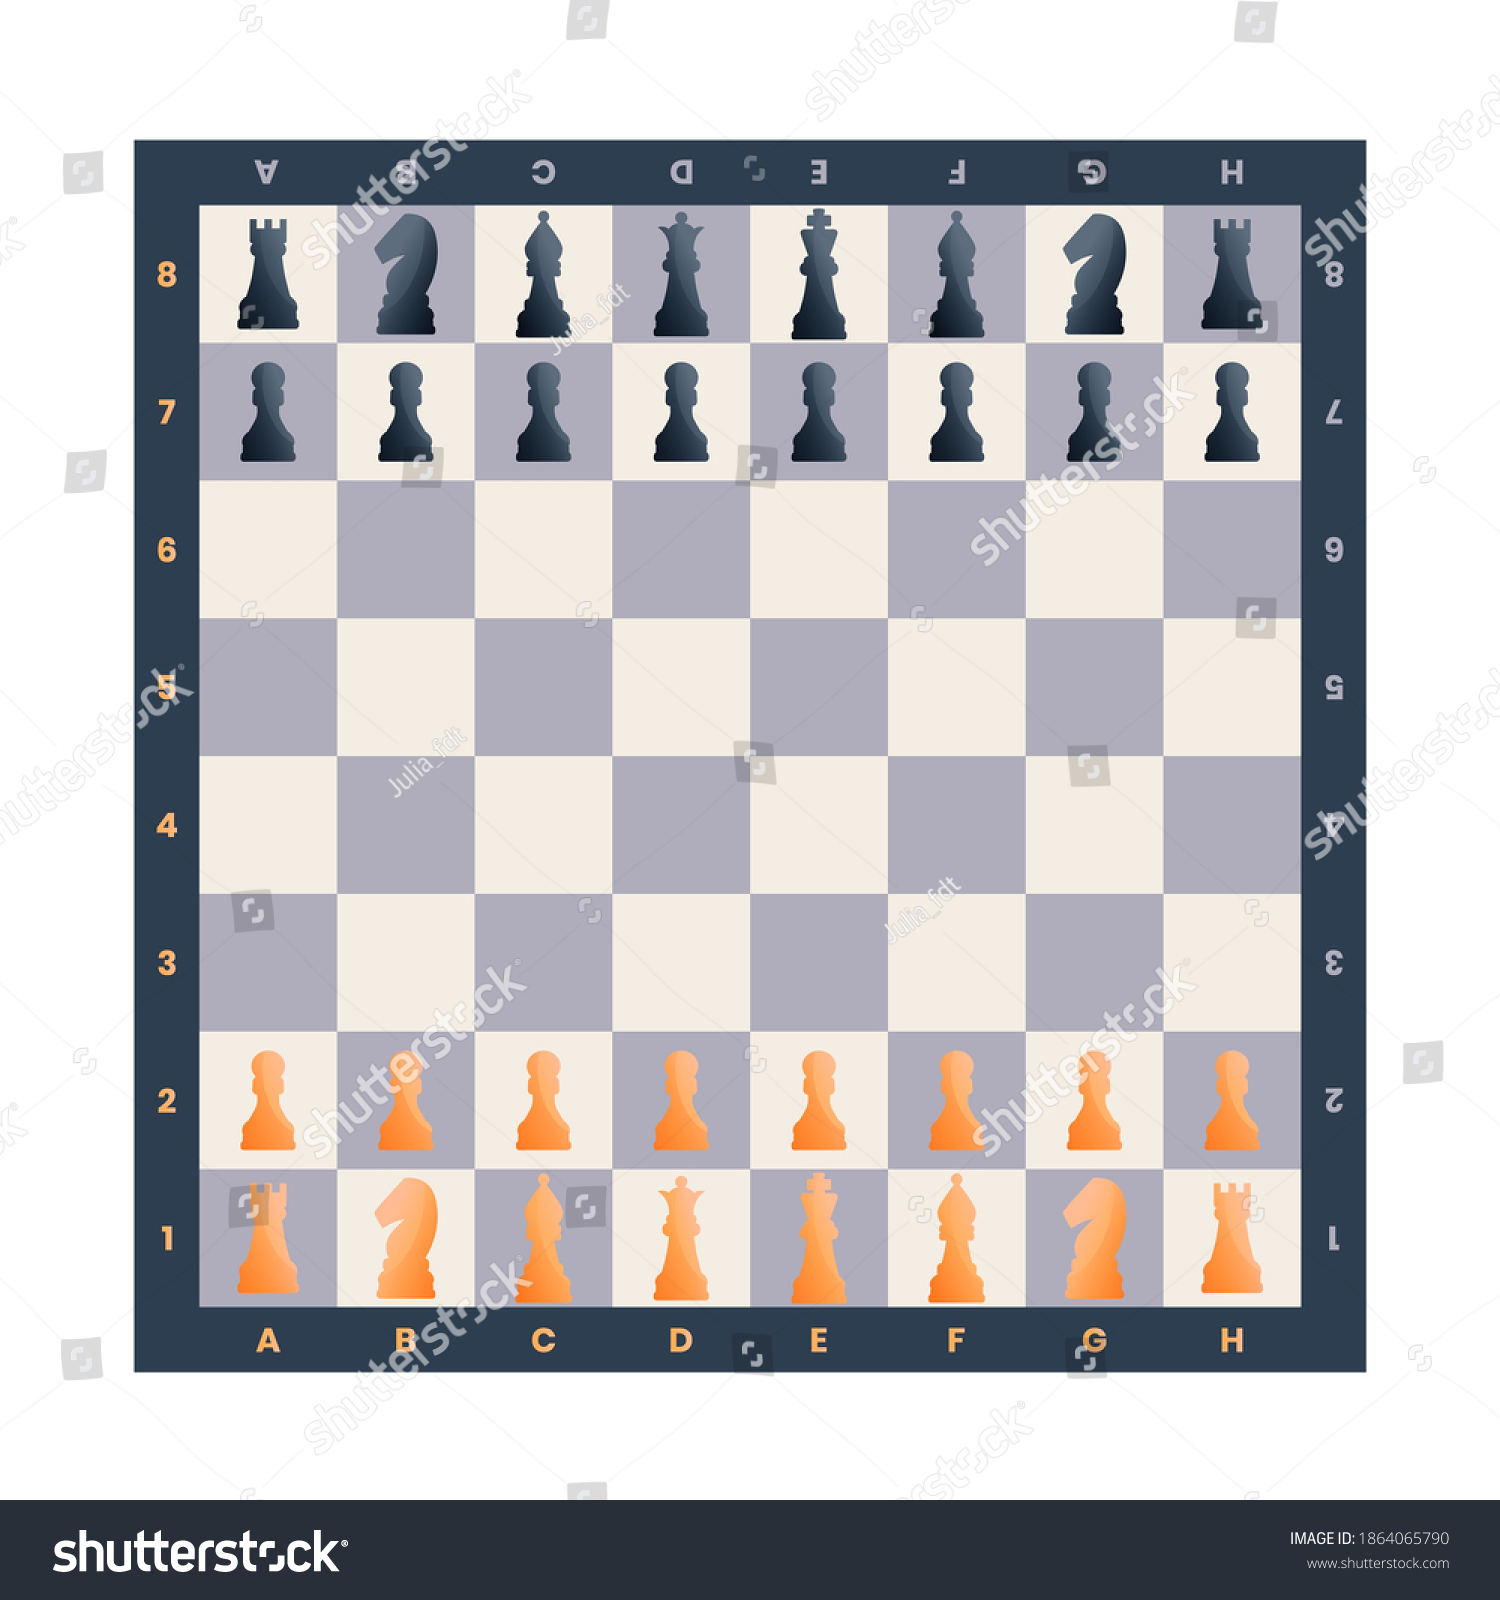 SVG of Vector chessboard with chess pieces, illustration of chess board and chessmen isolated on white background svg